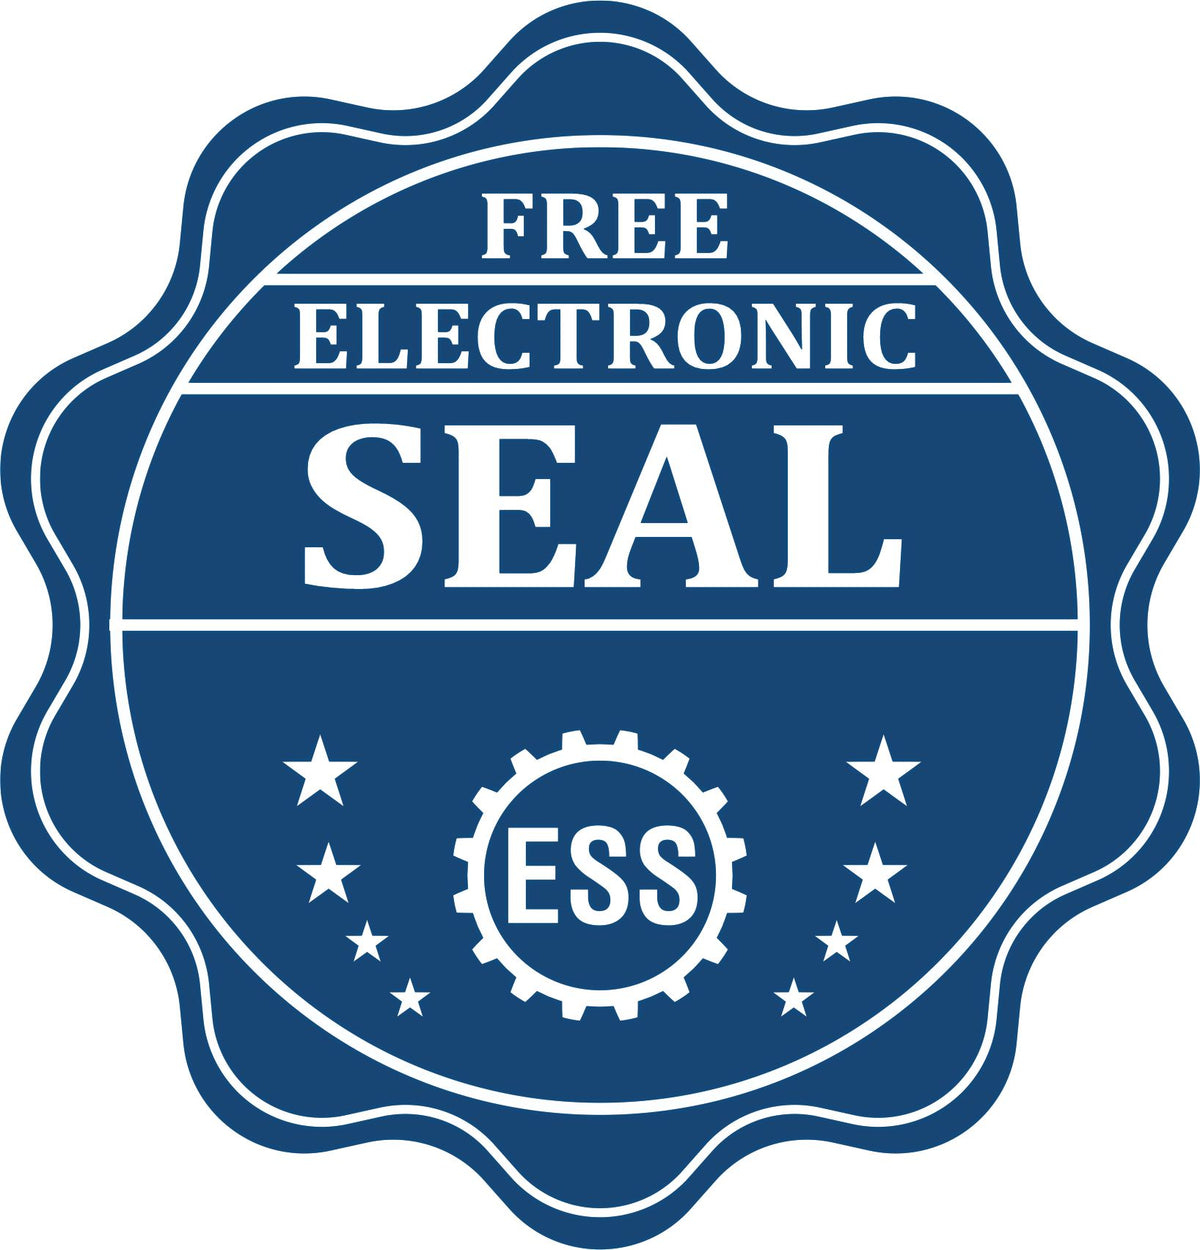 A badge showing a free electronic seal for the Hybrid Colorado Architect Seal with stars and the ESS gear on the emblem.